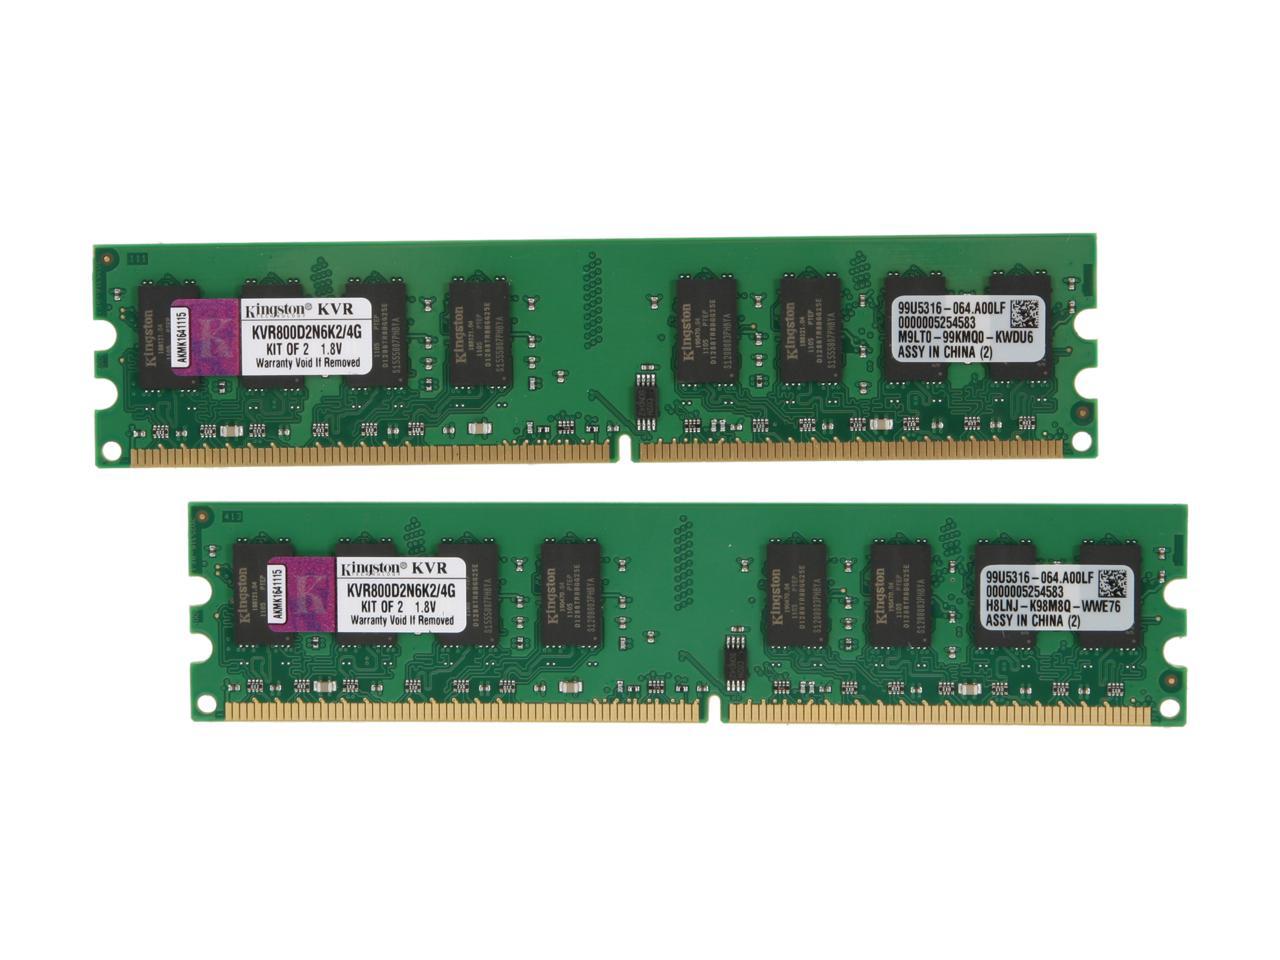 1GB DDR2-800 RAM Memory Upgrade for The Biostar USA N Series NF4 AM2G PC2-6400 